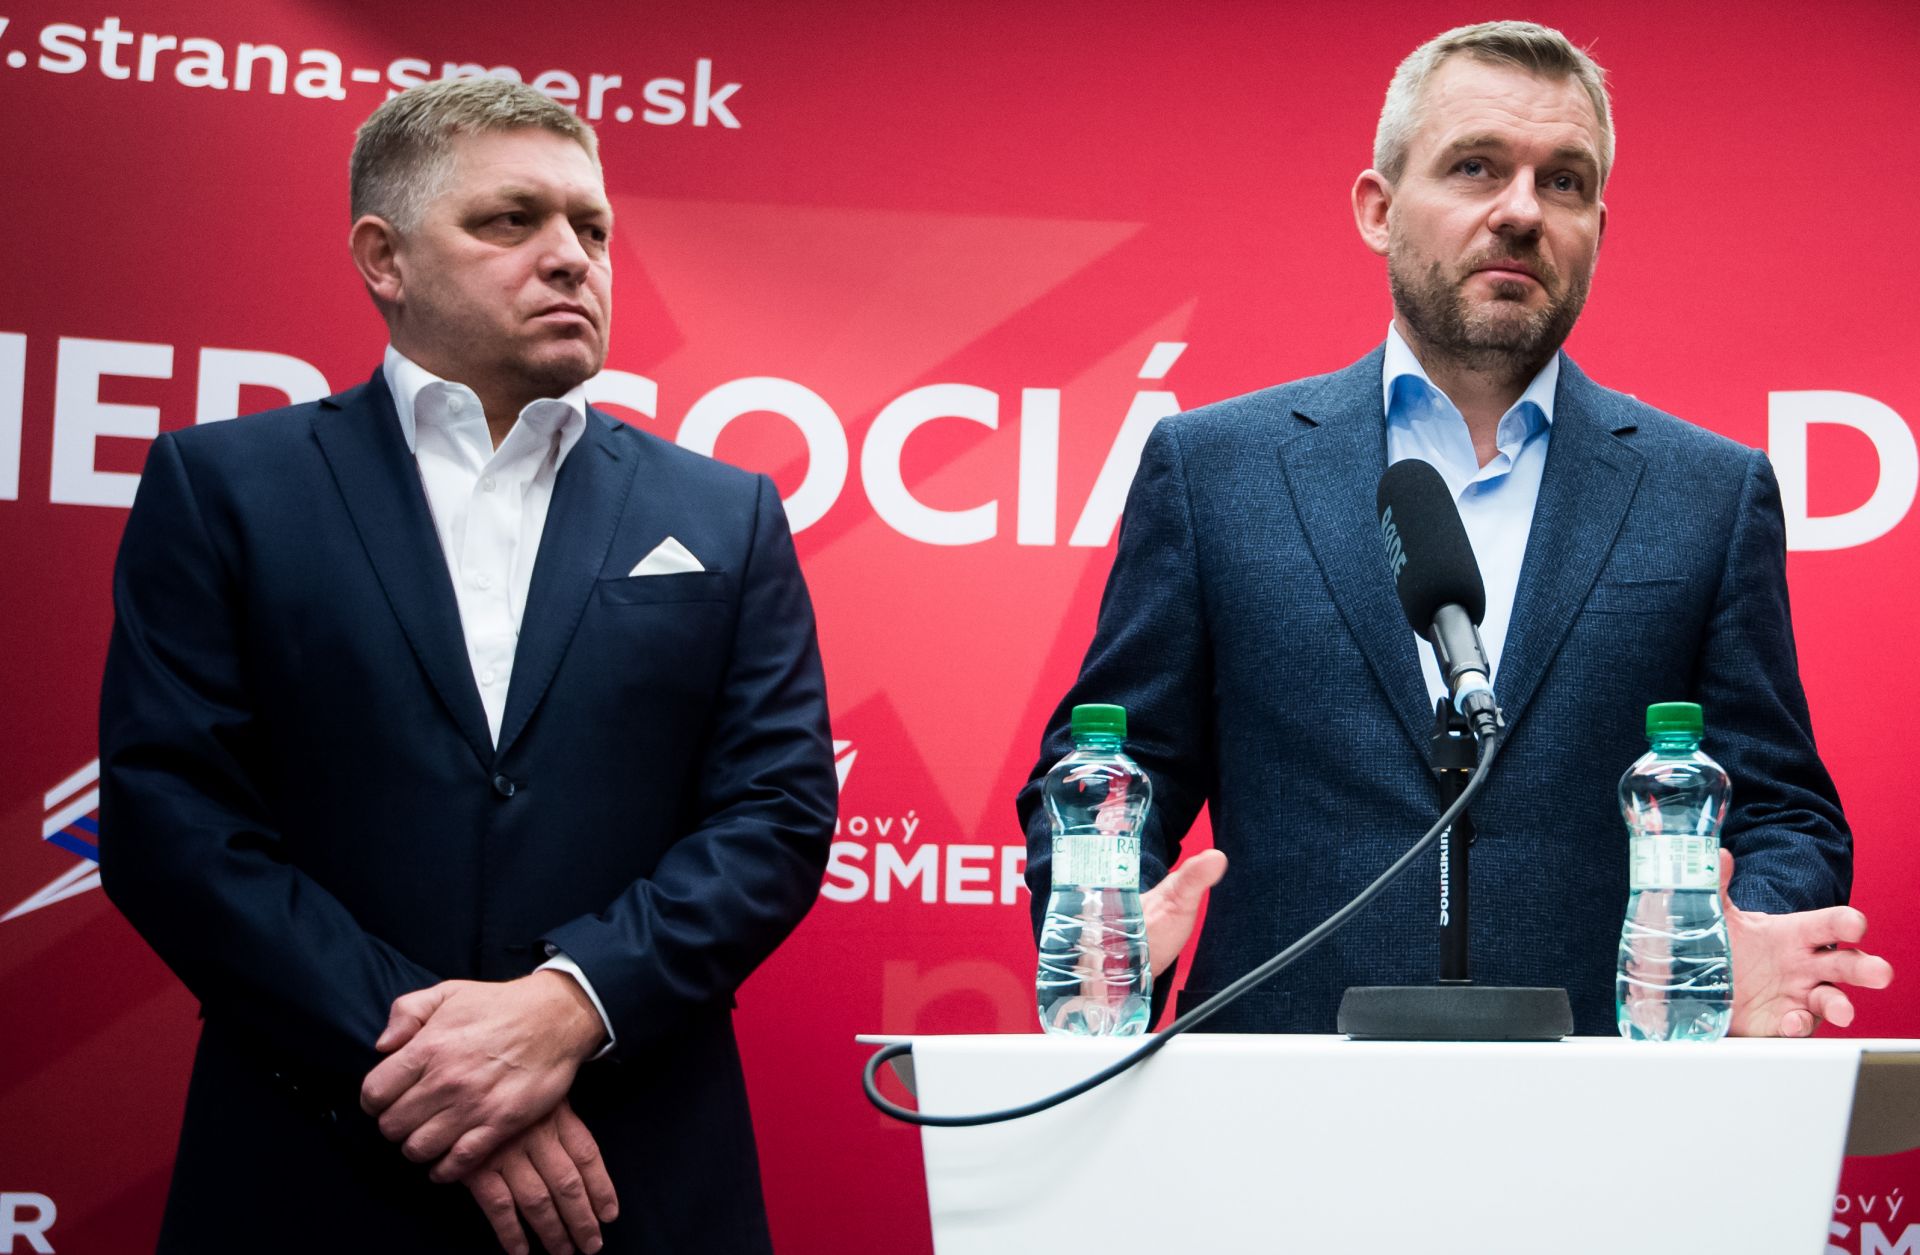 Robert Fico (left), Slovakia's former prime minister and leader of the populist Smer party, and then-Prime Minister Peter Pellegrini attend a press conference in Bratislava, Slovakia, on March 1, 2020.